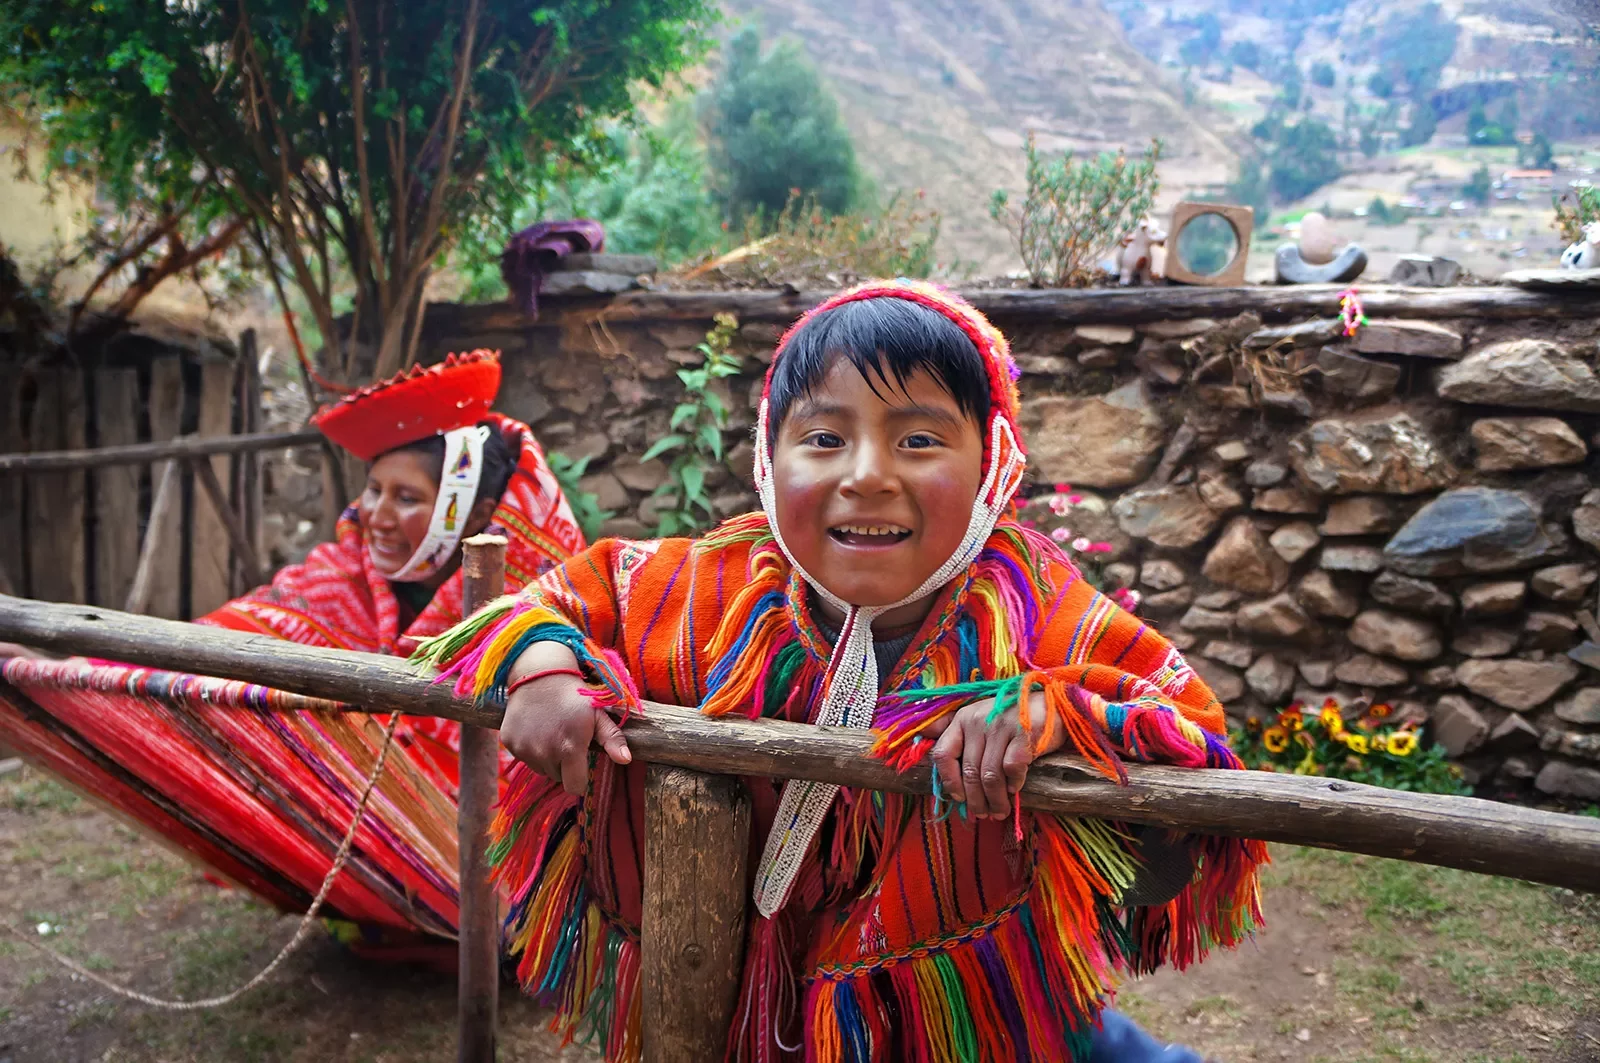 Two locals in colorful garb, one looking at camera, smiling.